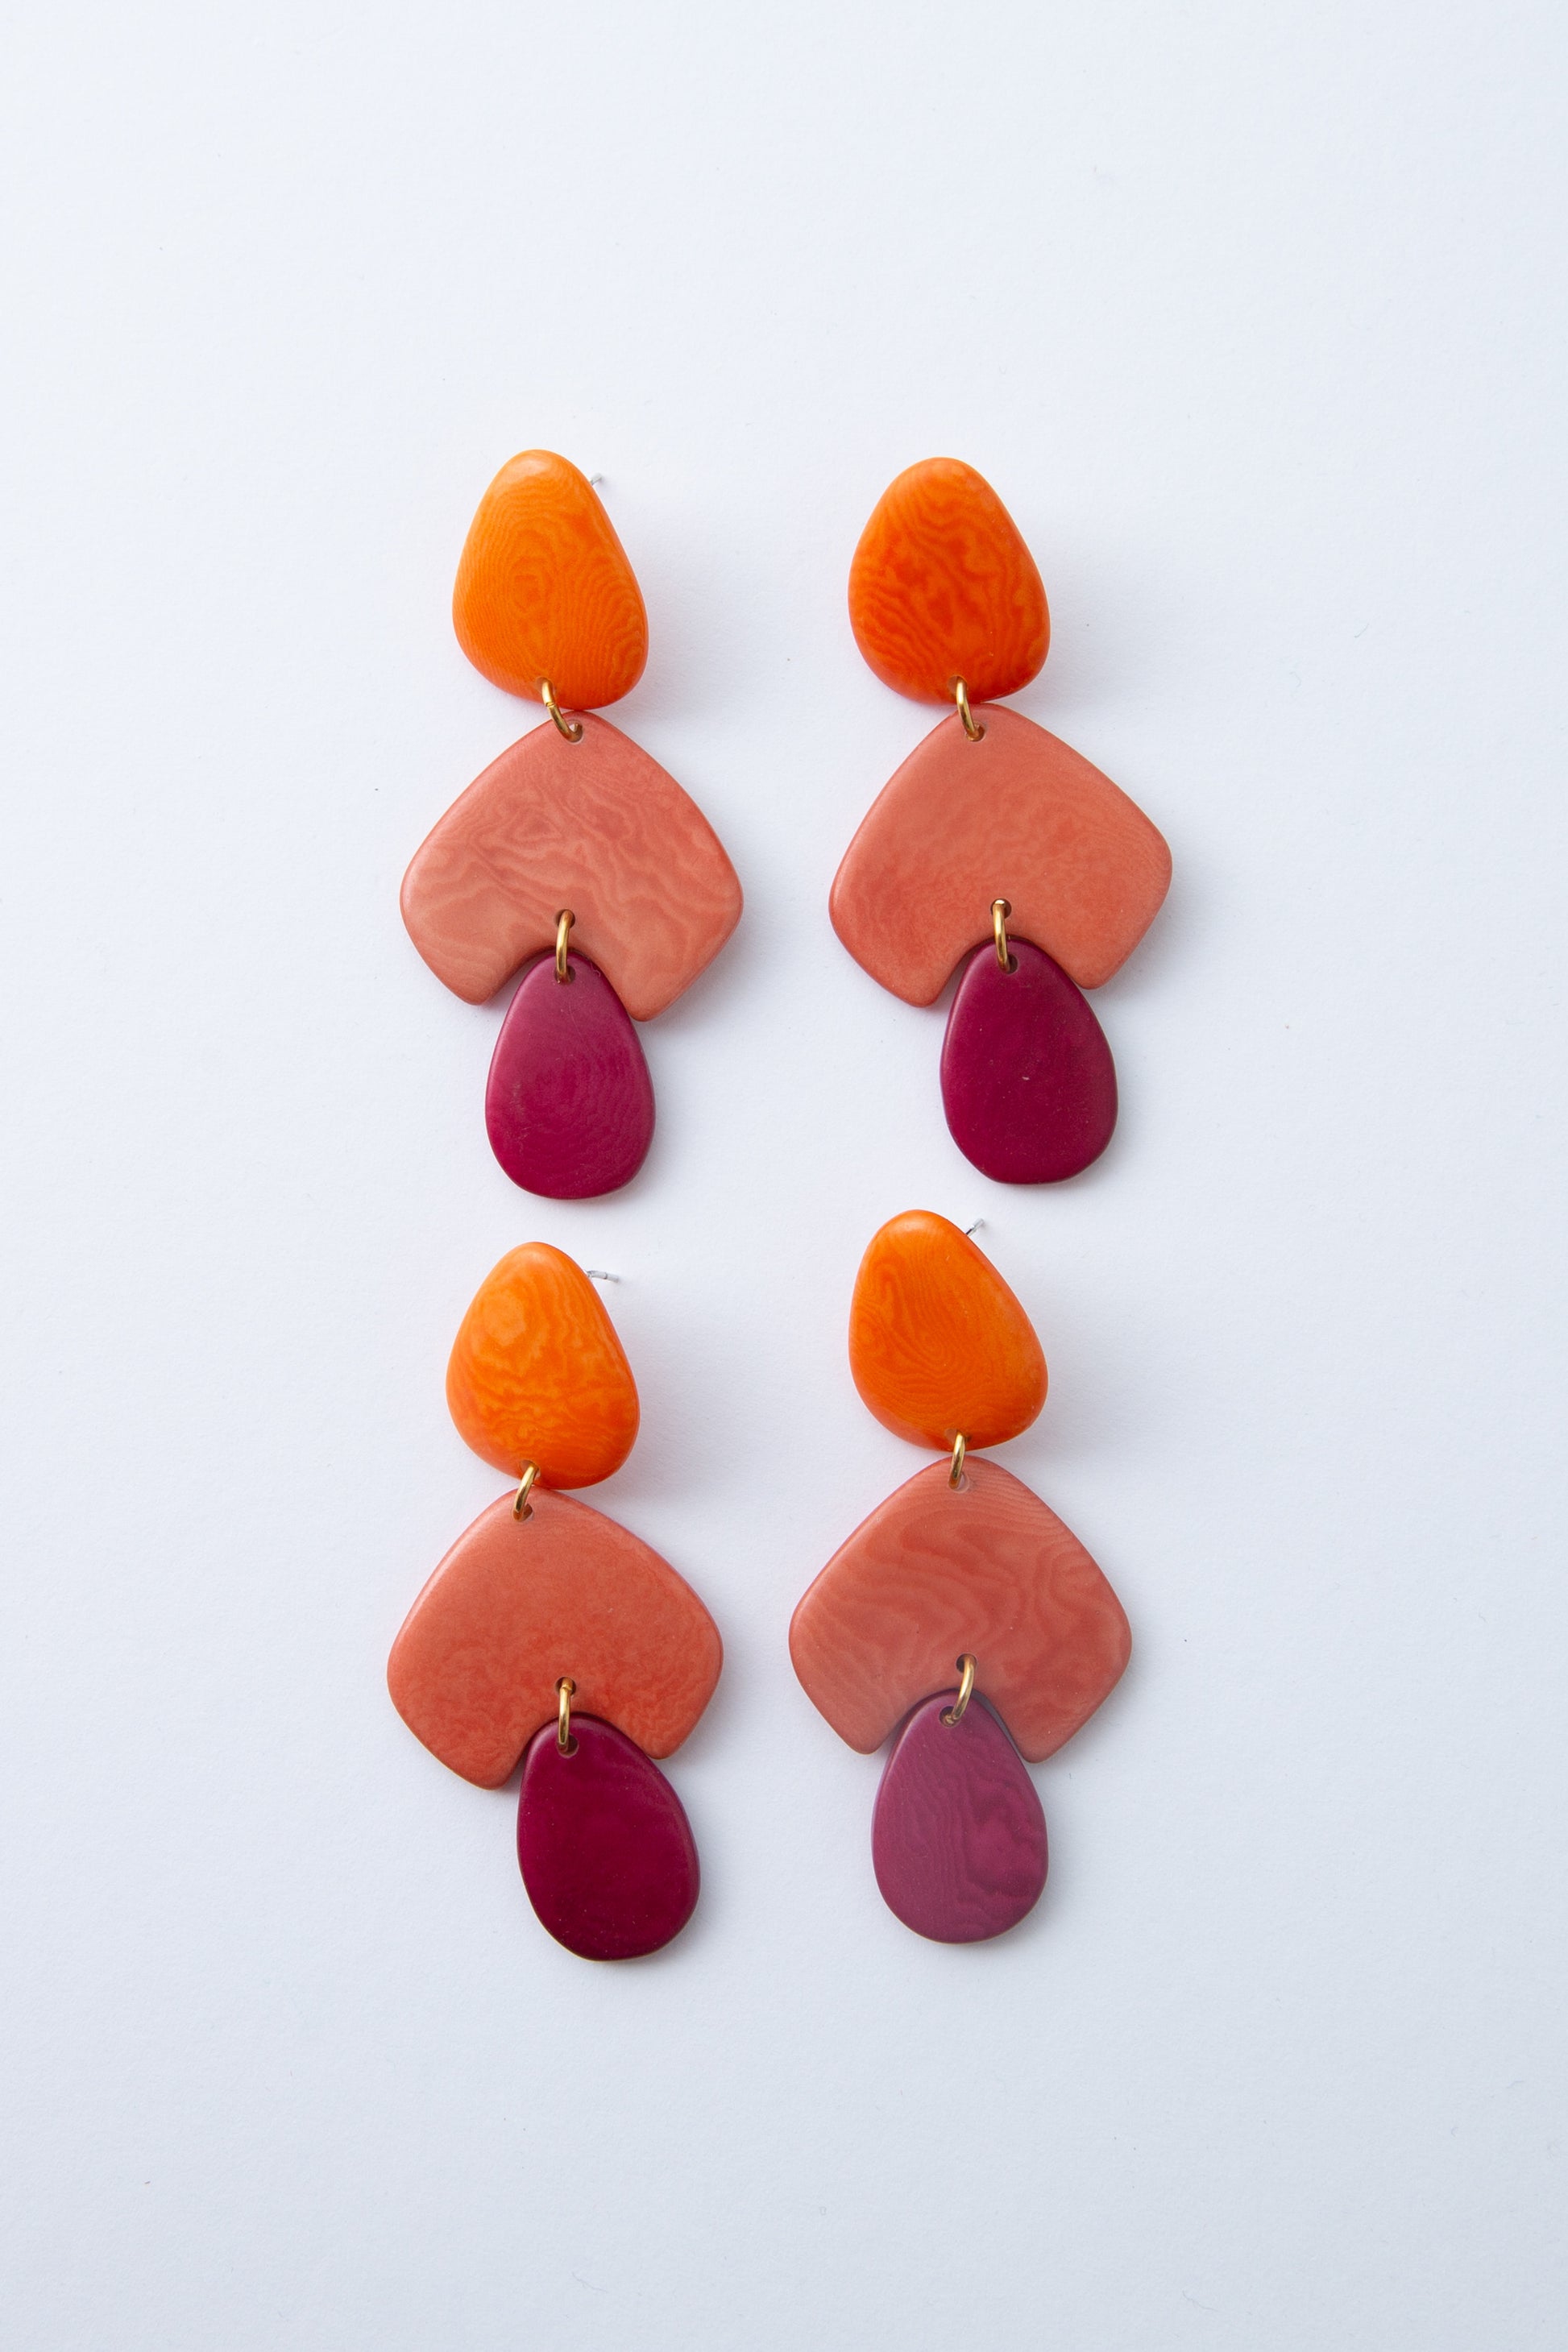 Two pairs of Sorbet Sunset Earrings are shown to highlight the color variations that can occur. The tagua pieces can be either lighter or darker due to the natural material used.